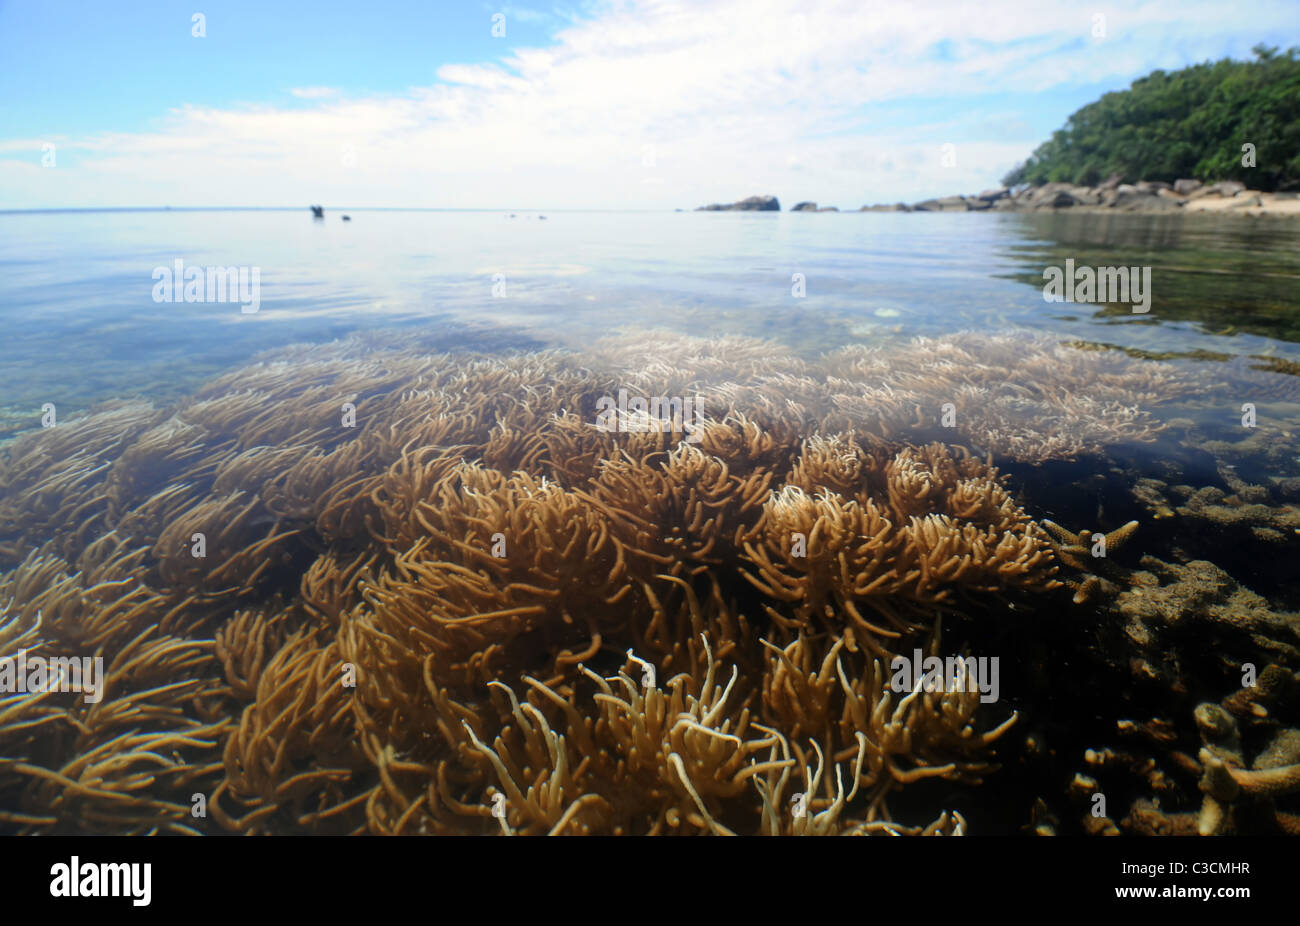 Soft coral in shallows at calm low tide, Fitzroy Island, Great Barrier Reef, Queensland, Australia Stock Photo